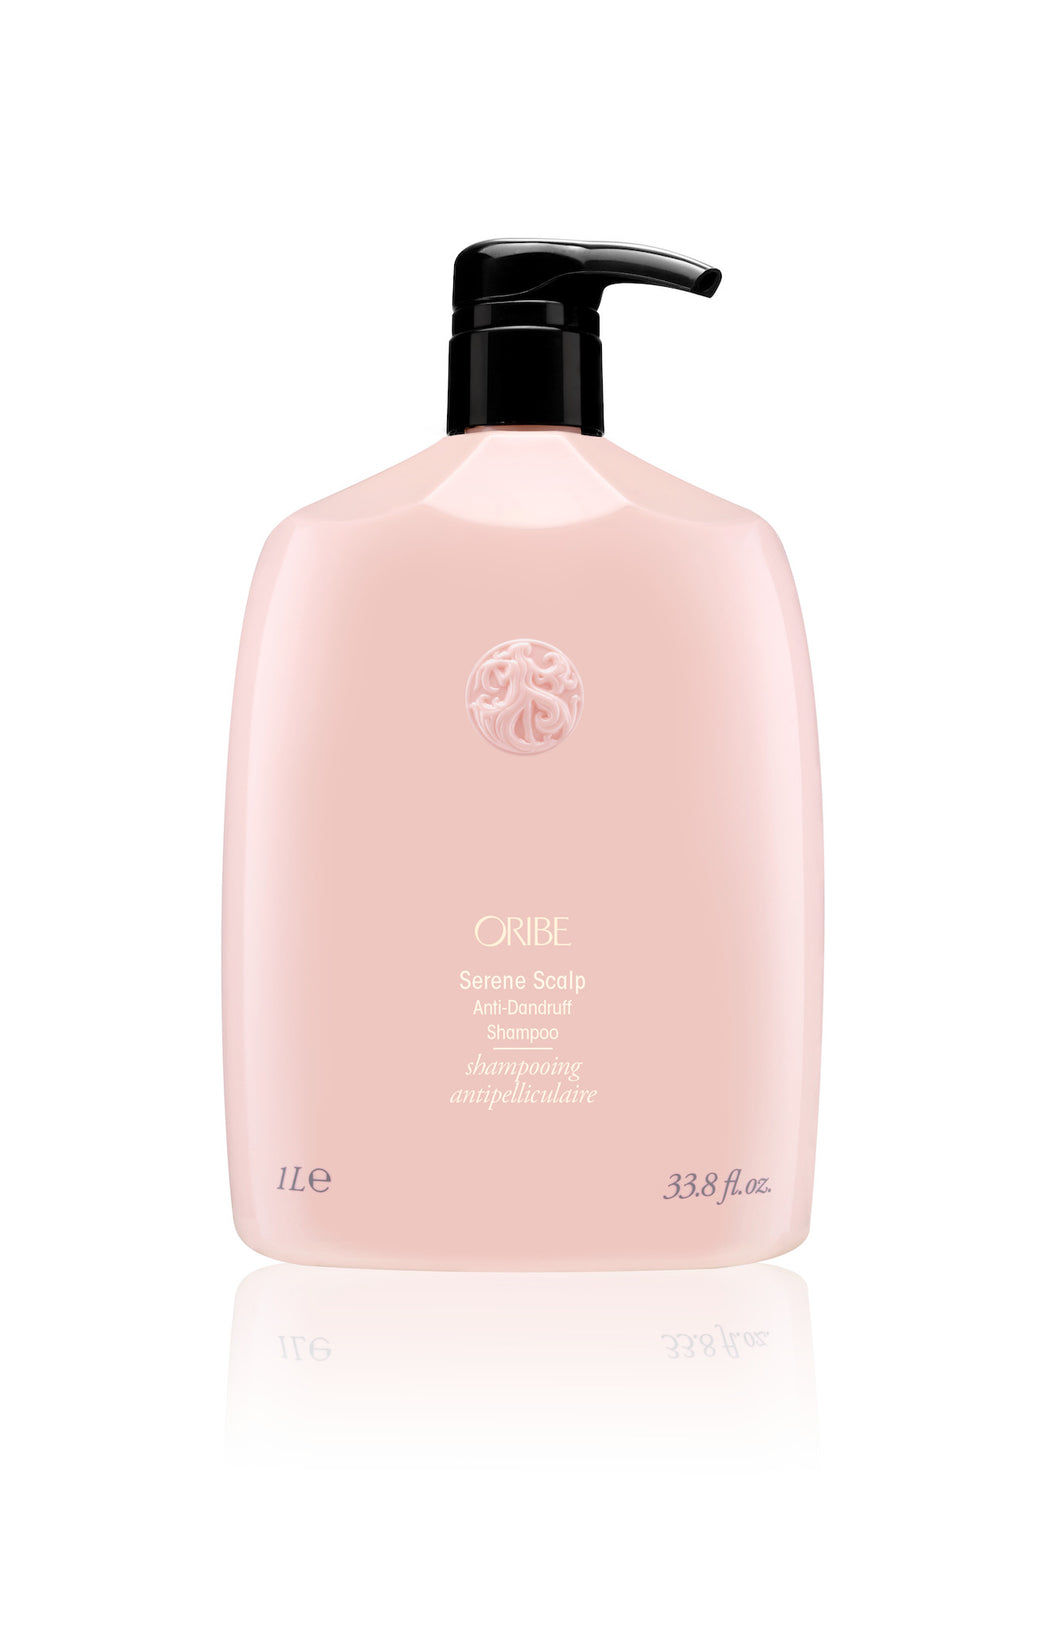 Oribe - SERENE SCALP Shampoo baby pink rounded liter bottle with black pump top